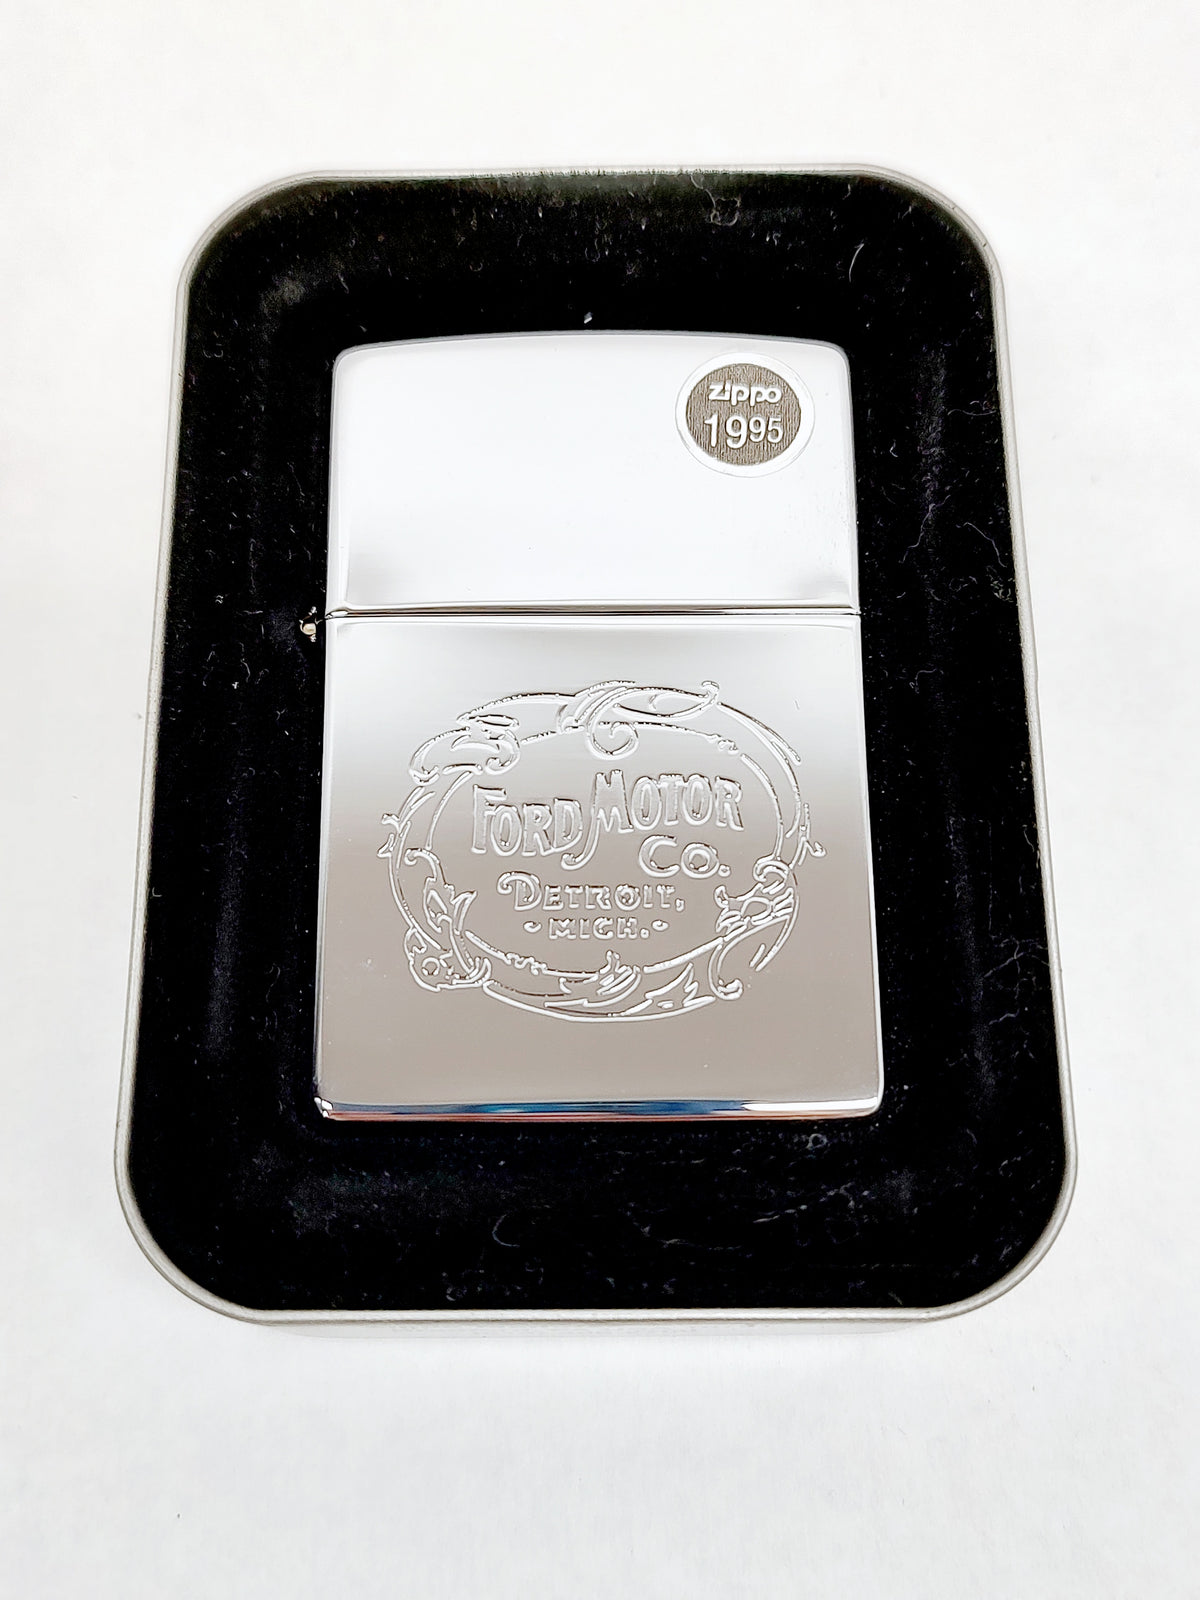 New 1998 XIV Ford Motor Co. Detroit Michigan 1903 Heritage Logo Engraved Zippo Lighter - Hers and His Treasures